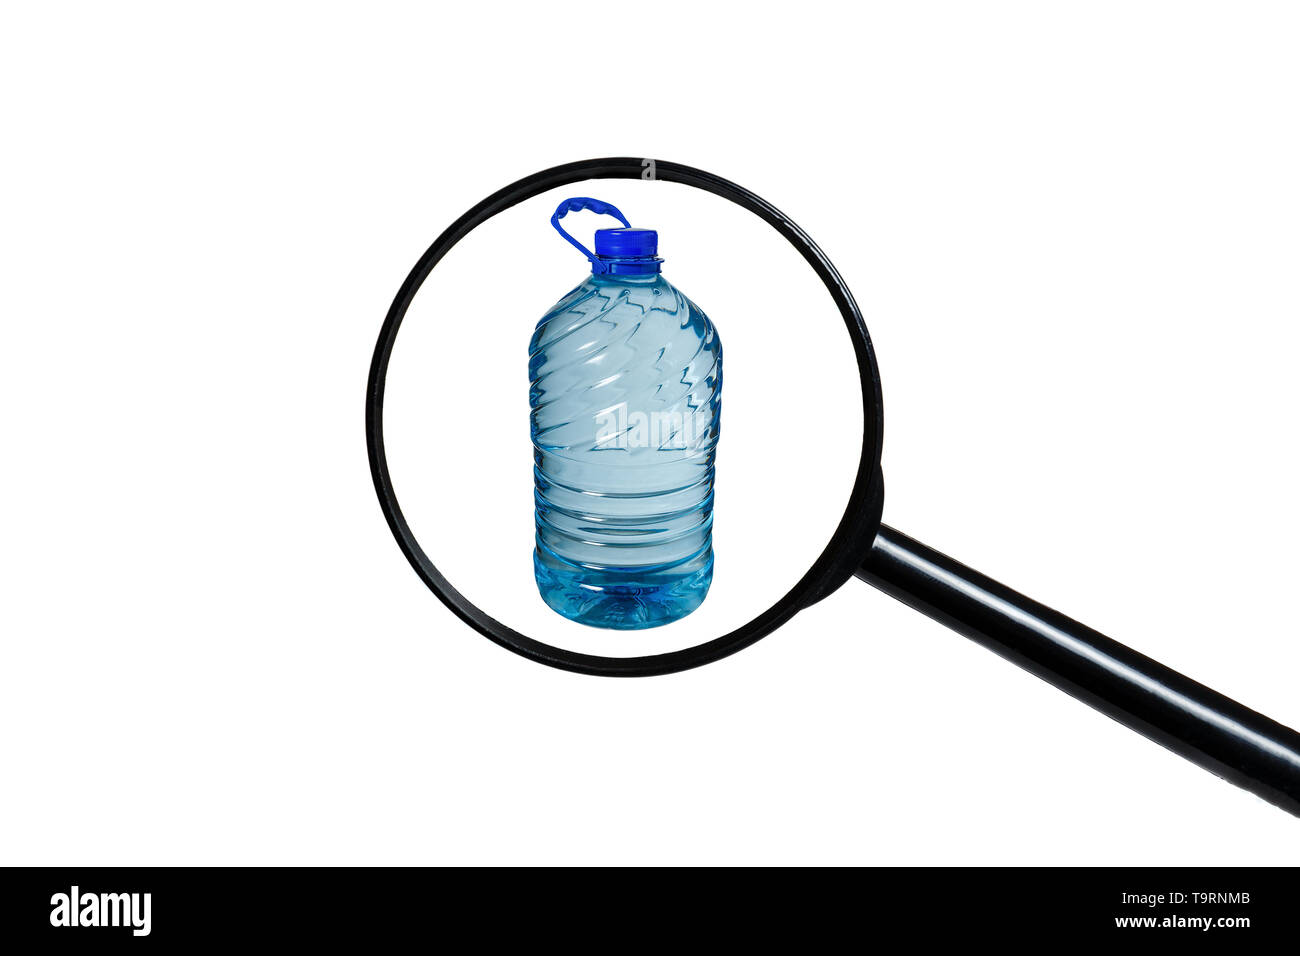 Big bottle of water isolated on a white background, view through a magnifying glass Stock Photo